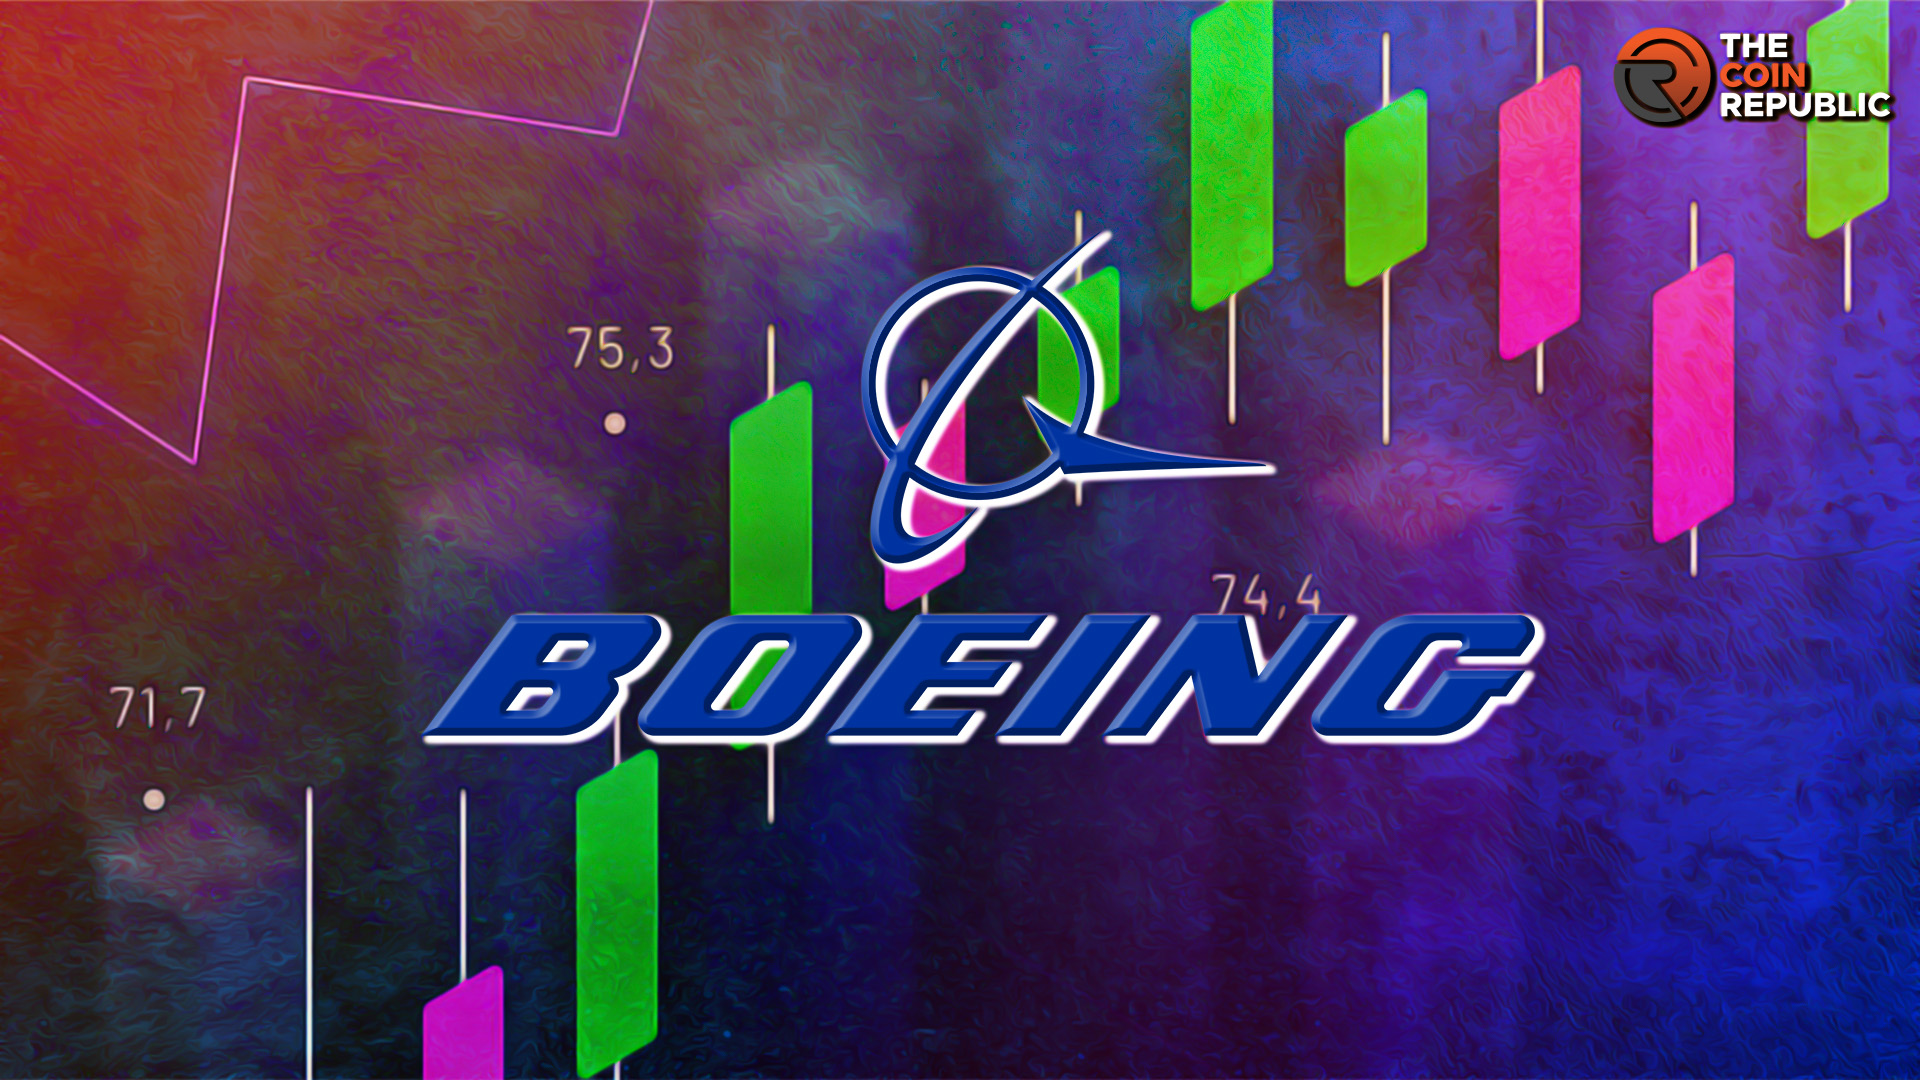 Boeing Stock (NYSE: BA) Q2 Tops Analyst Estimates, Leads Breakout